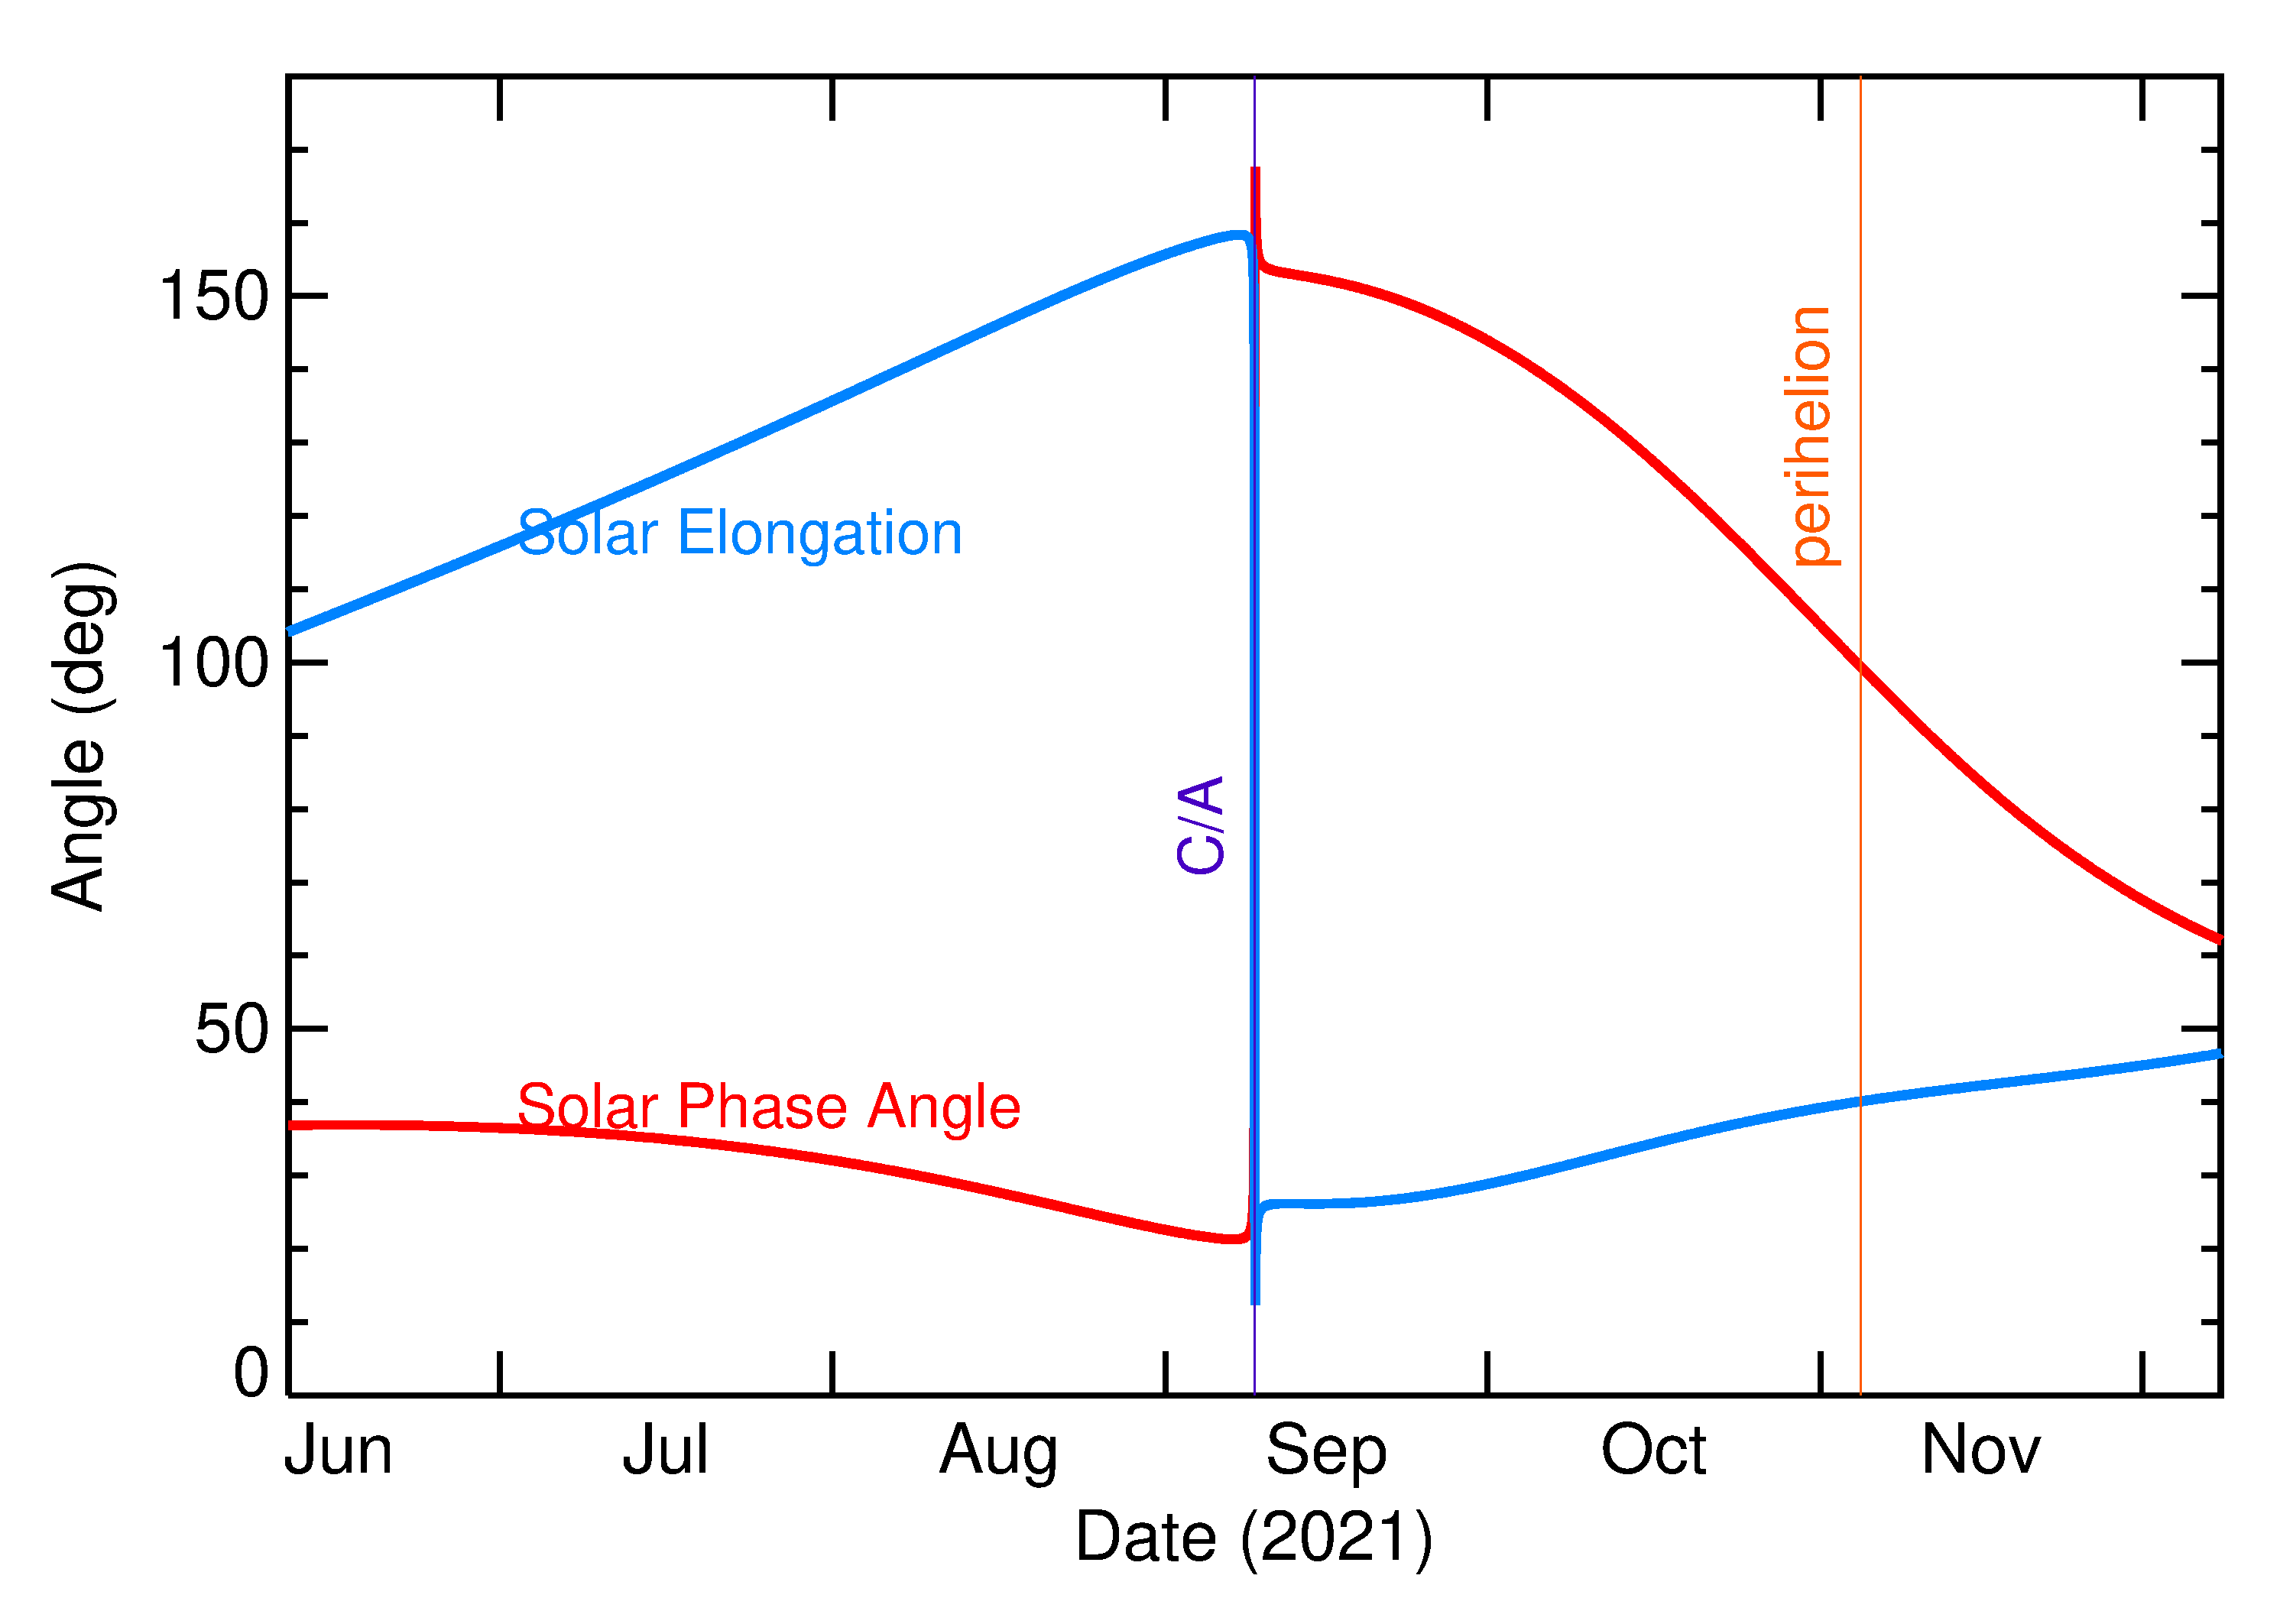 Solar Elongation and Solar Phase Angle of 2021 RS2 in the months around closest approach